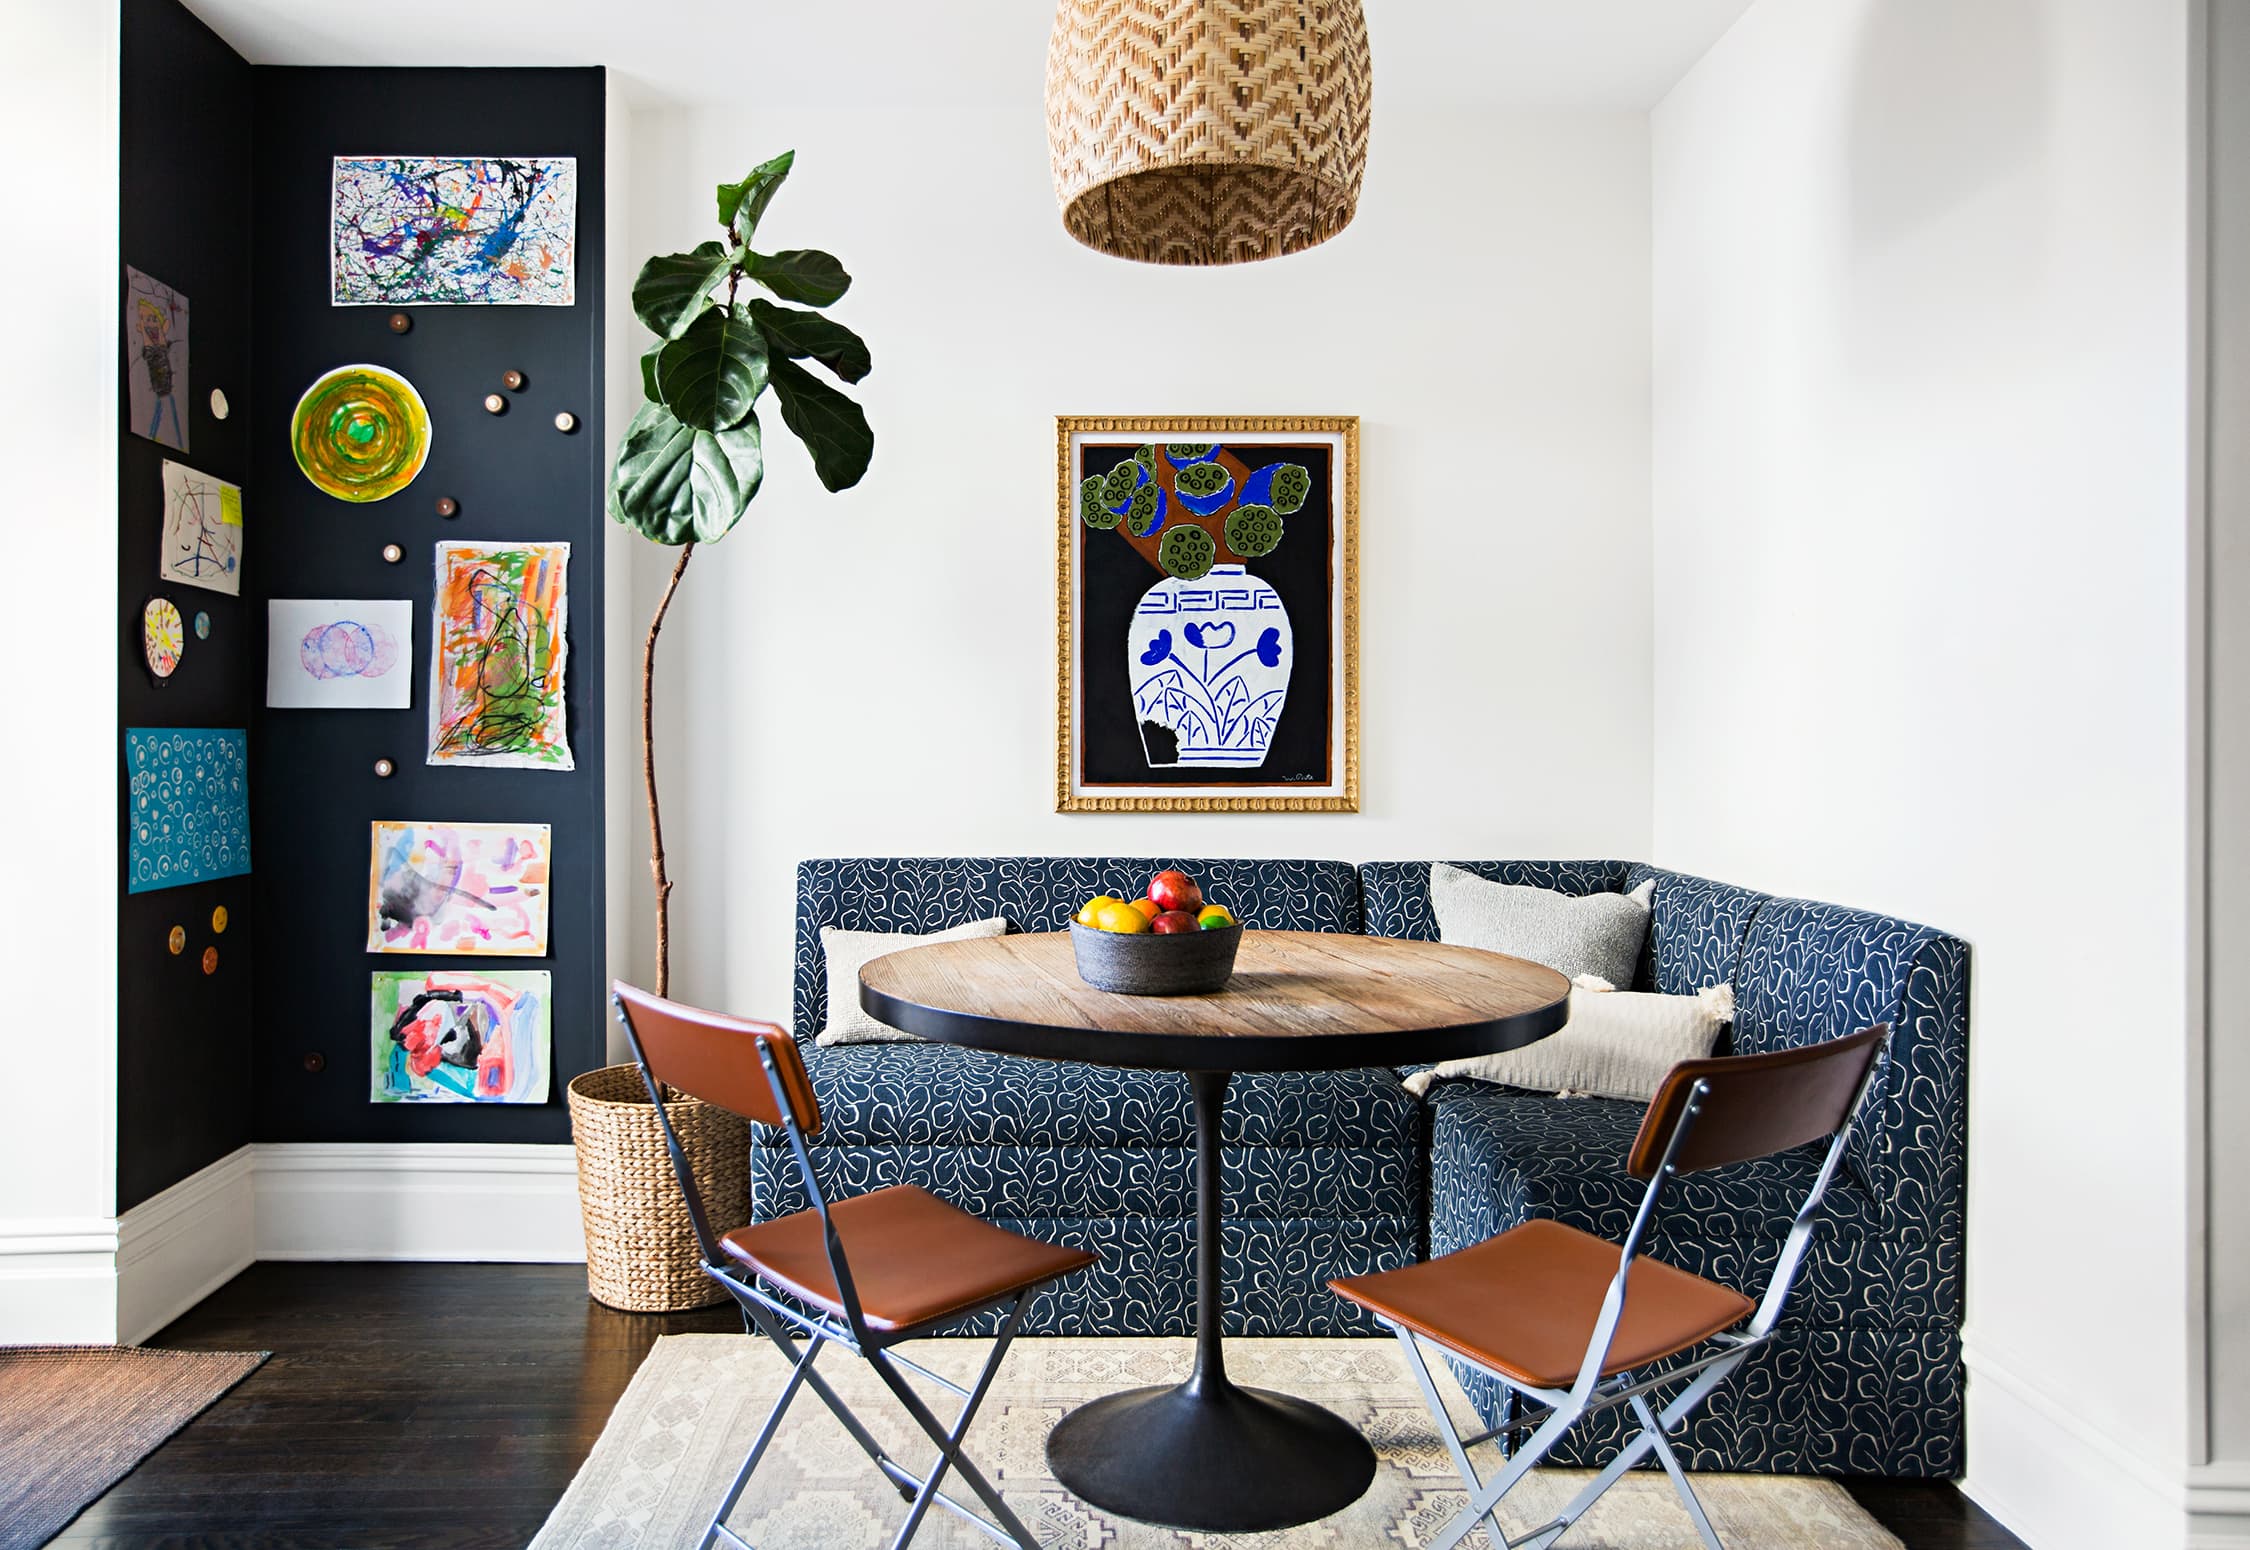 Small-Space Dining Tables We Love — And They Double as Desks